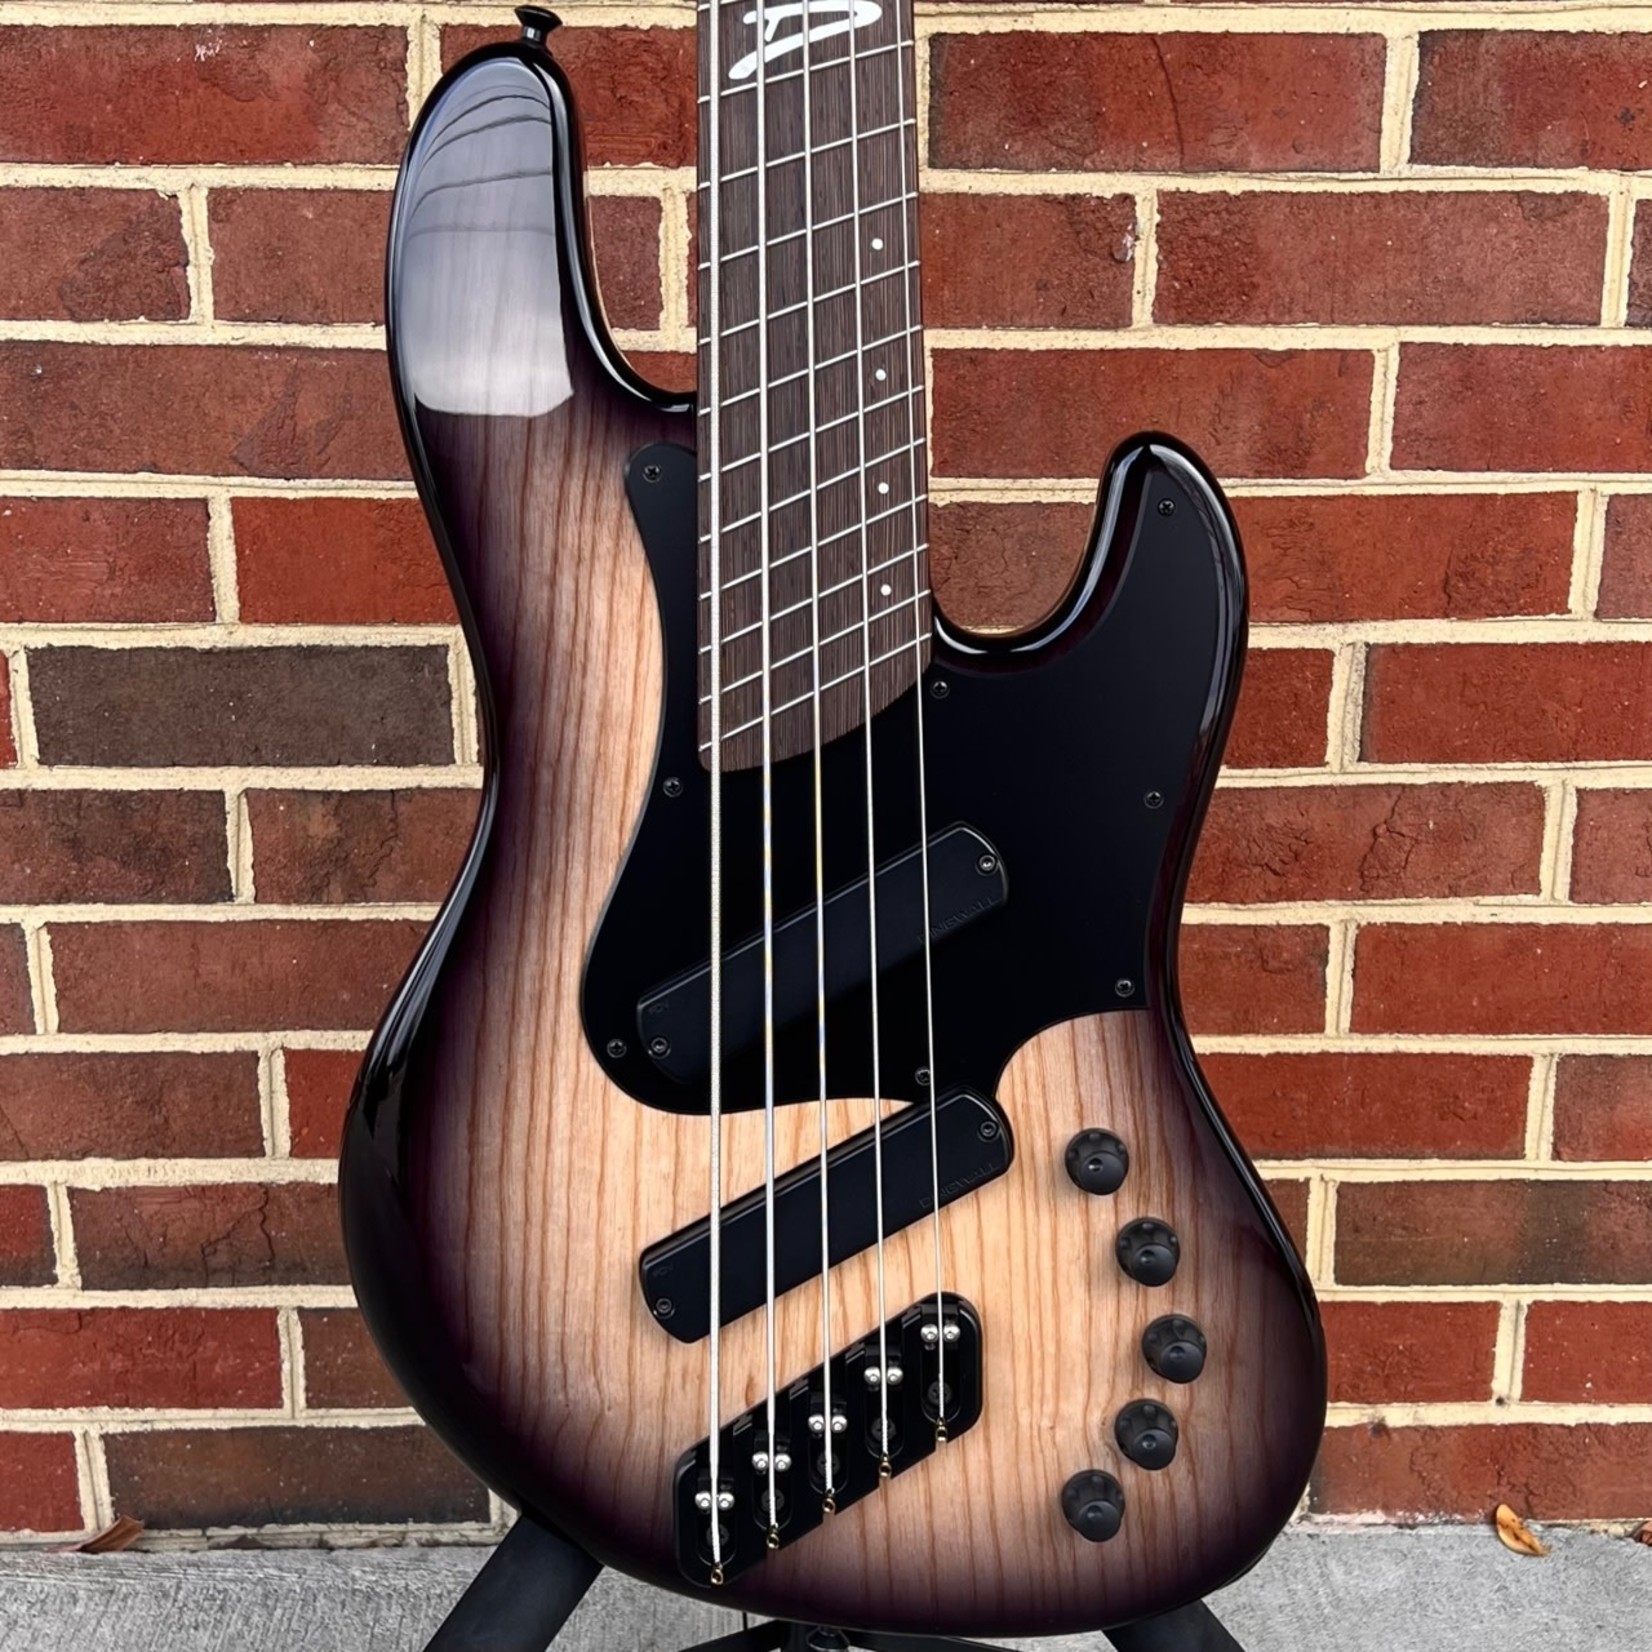 Dingwall Dingwall Super J, 5-String, Black to Natural Burst, Swamp Ash Body, Blacked Out Maple Neck, Wenge Fretboard, Dot Inlays, Luminlay Side Dots, Dingwall Deluxe Gig Bag